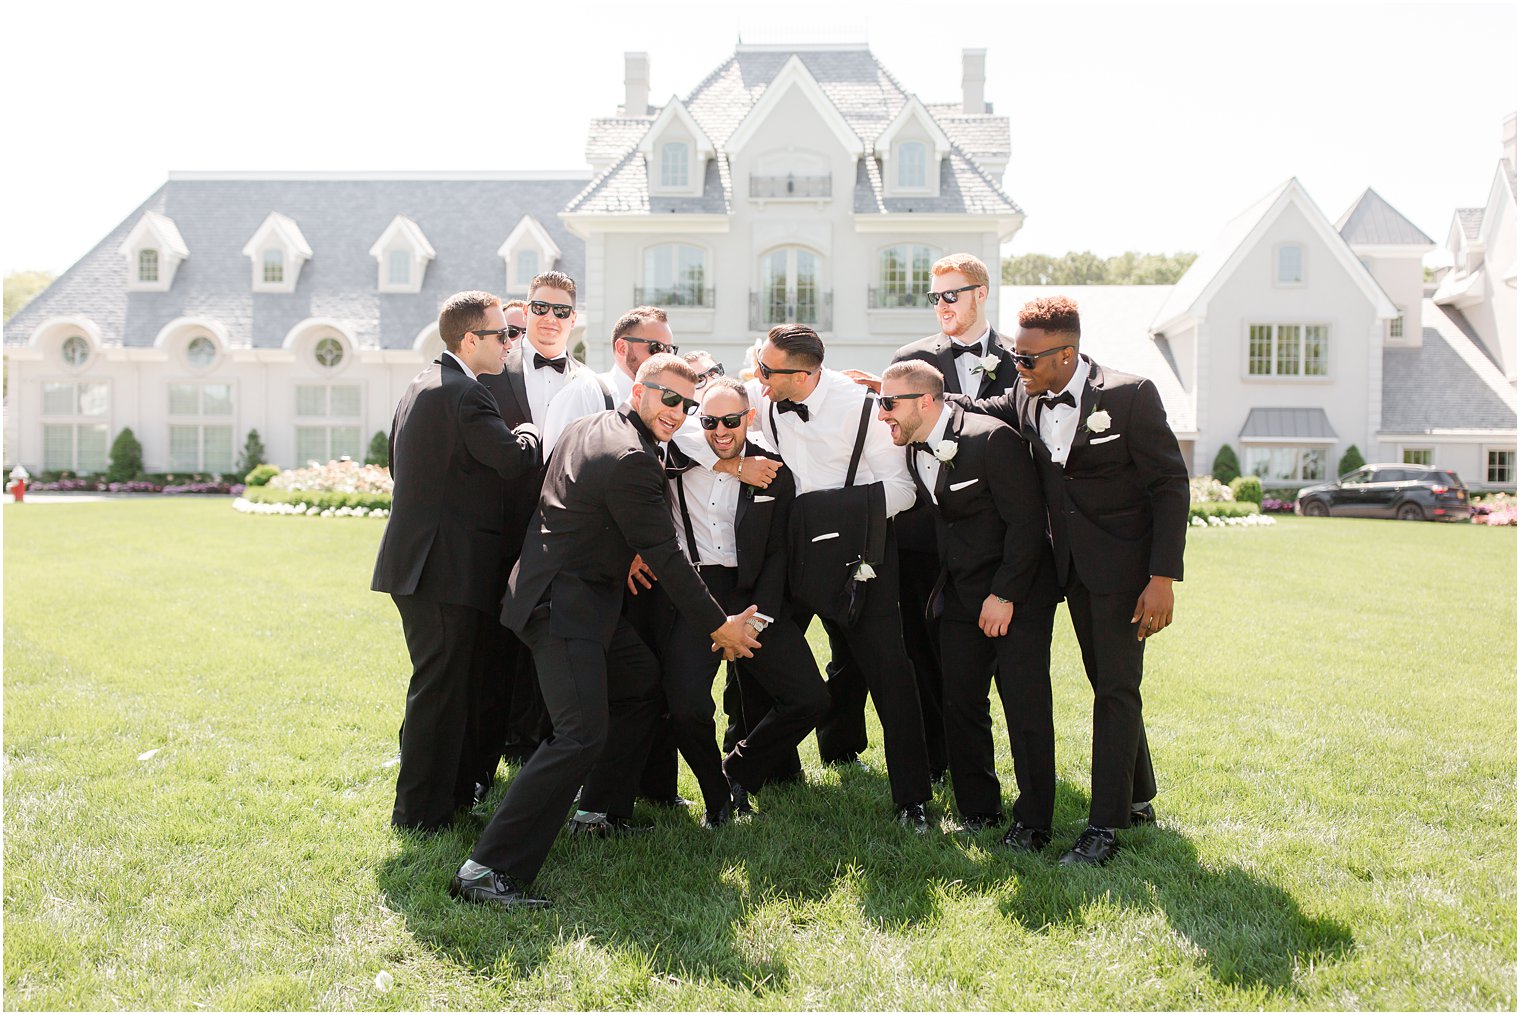 Candid groomsmen photo at Park Chateau Estate